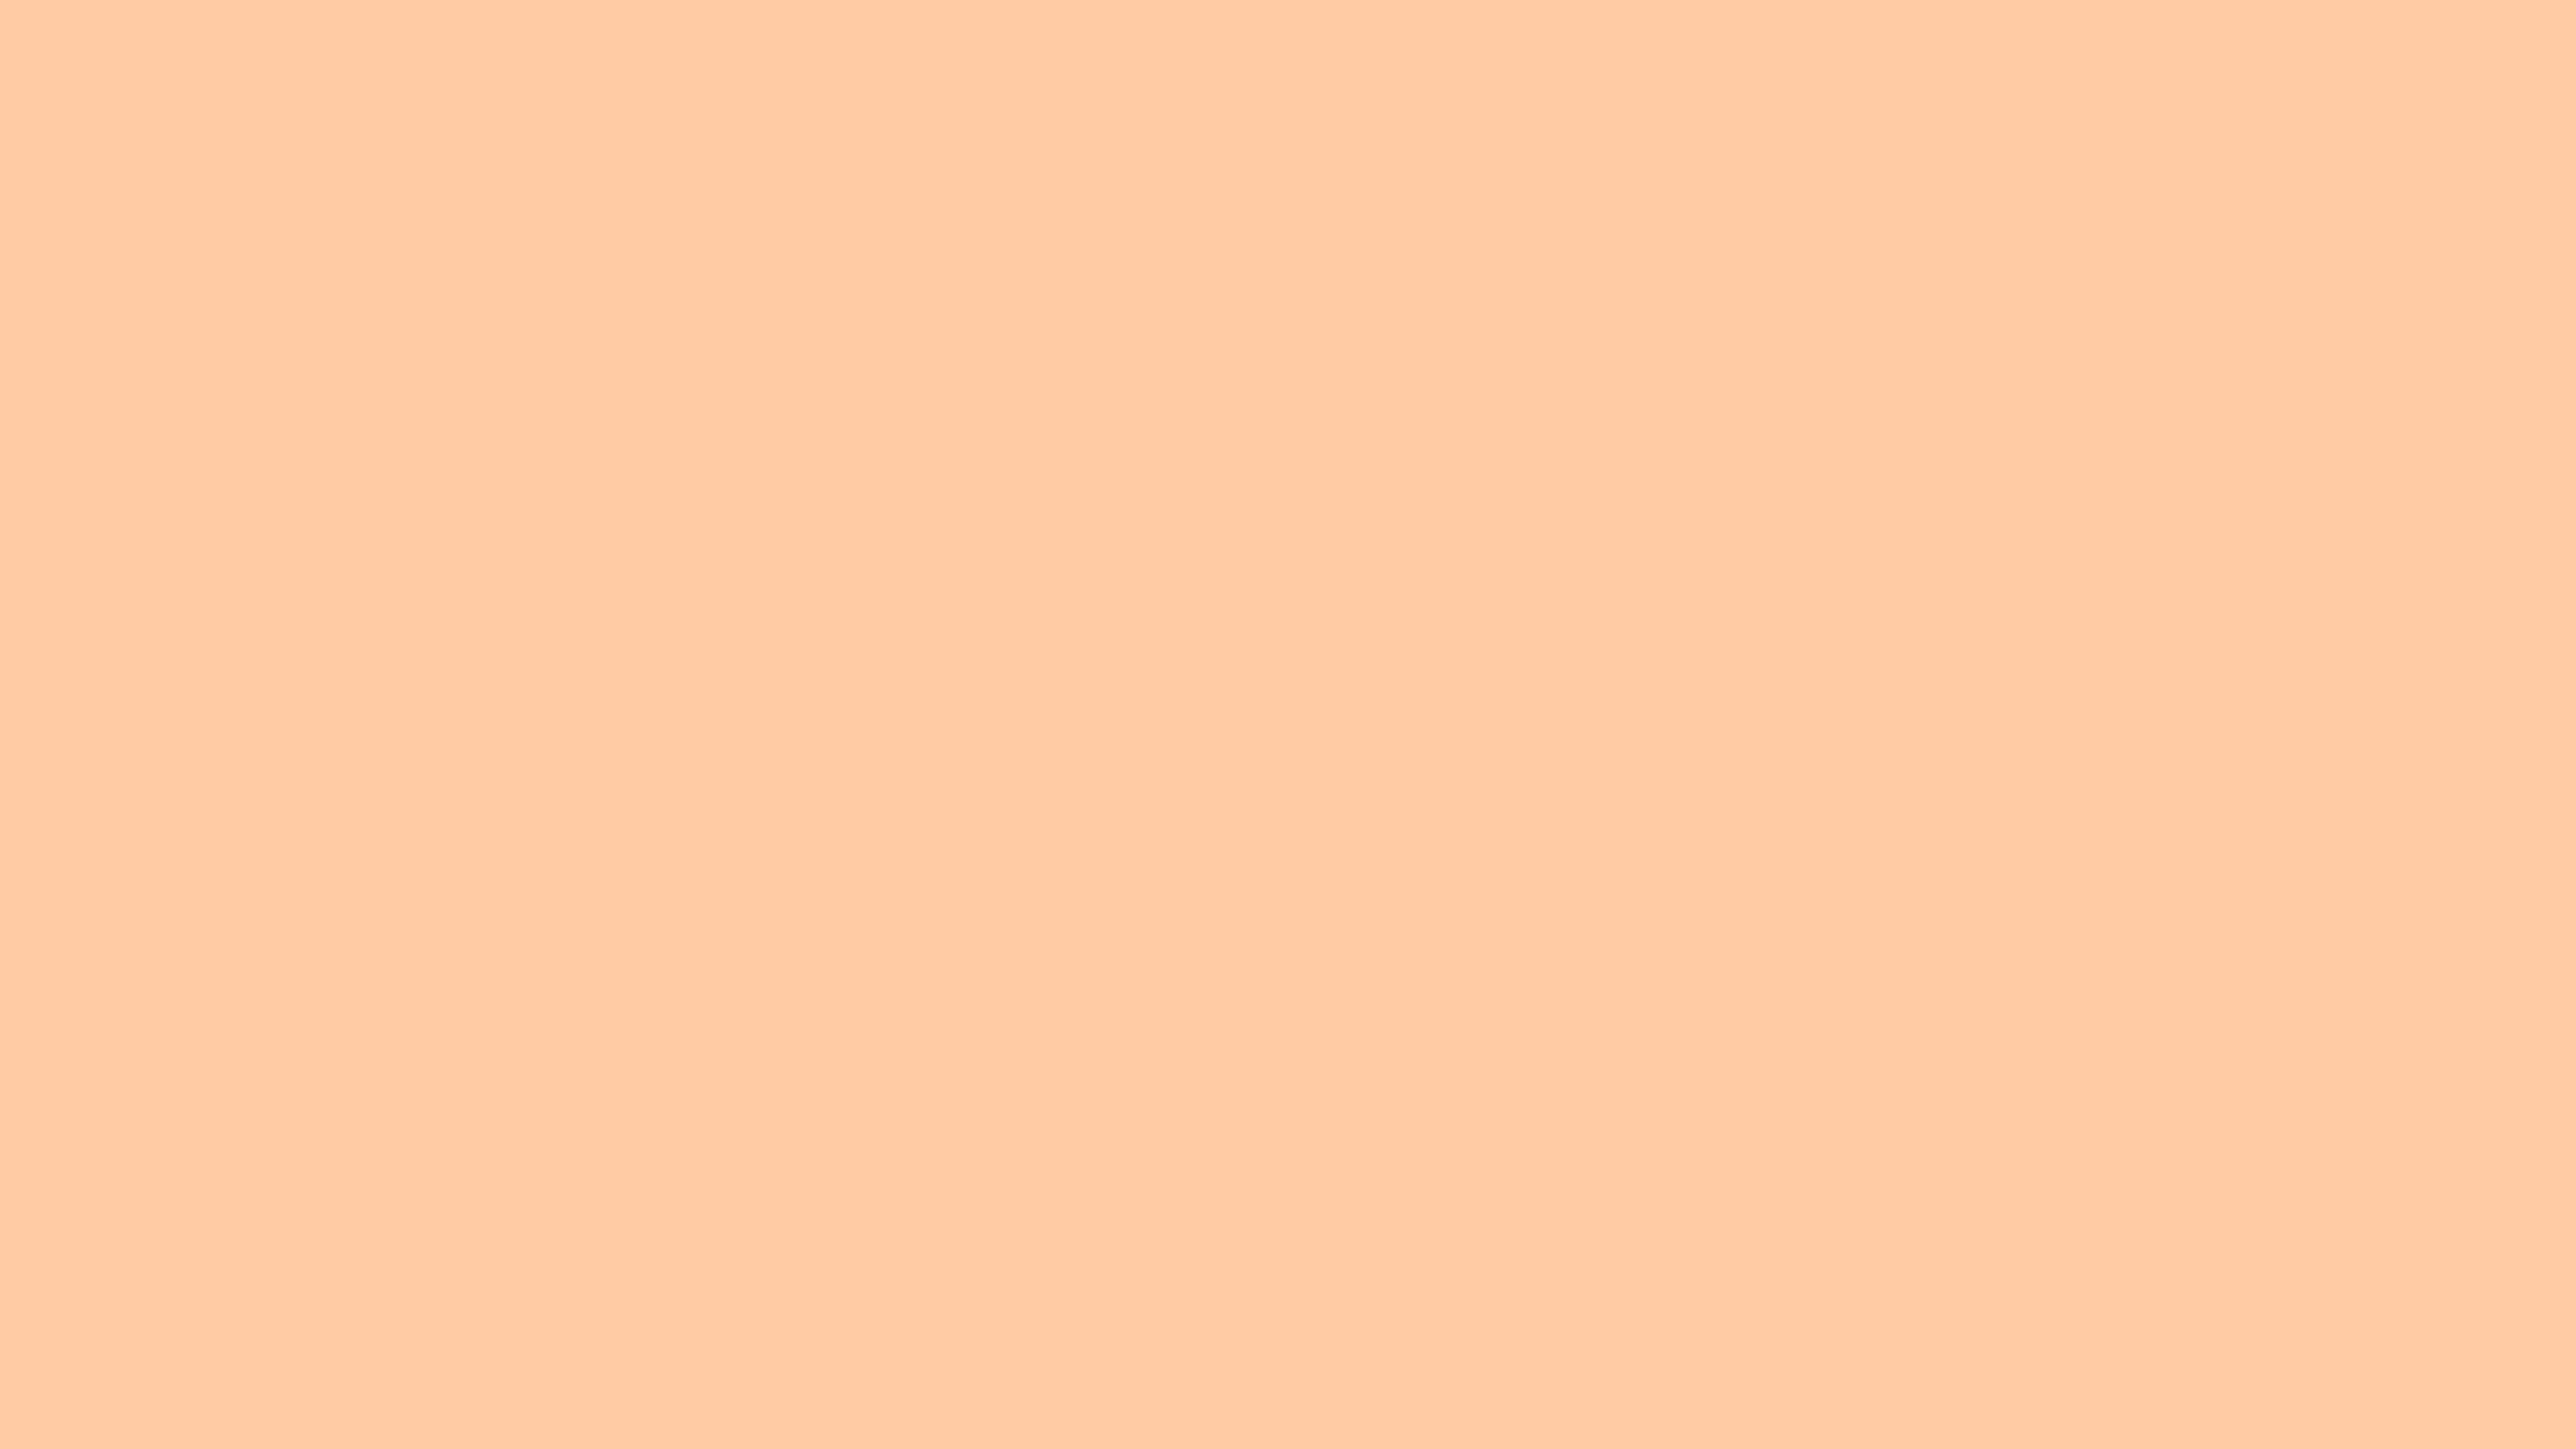 5120x2880 Deep Peach Solid Color Background 5120x2880